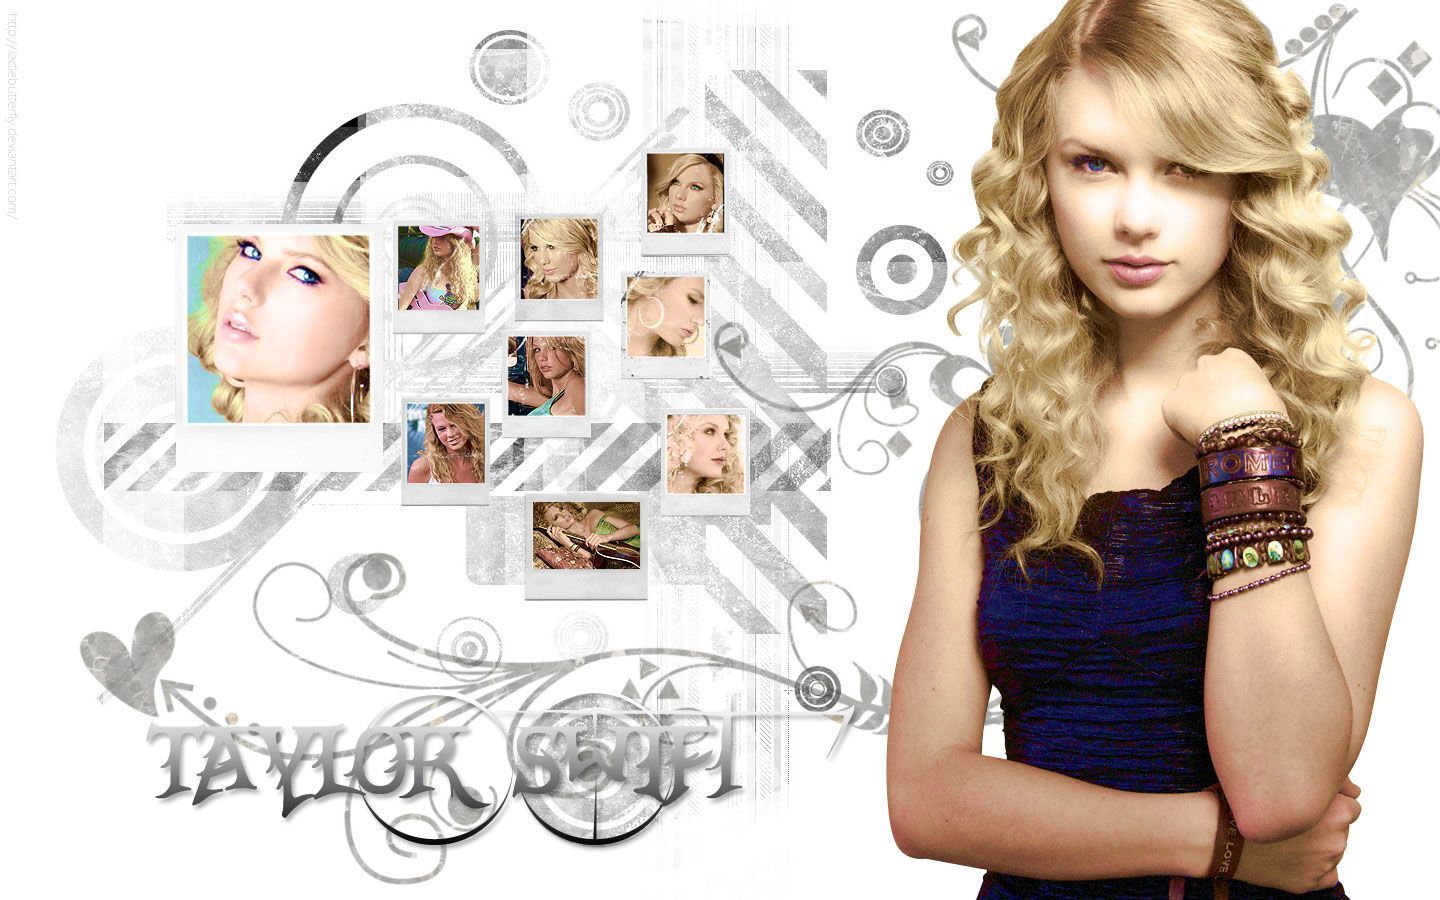 Taylor Swift Hd Wallpapers 3 | Free High Definition Unique Hd ...